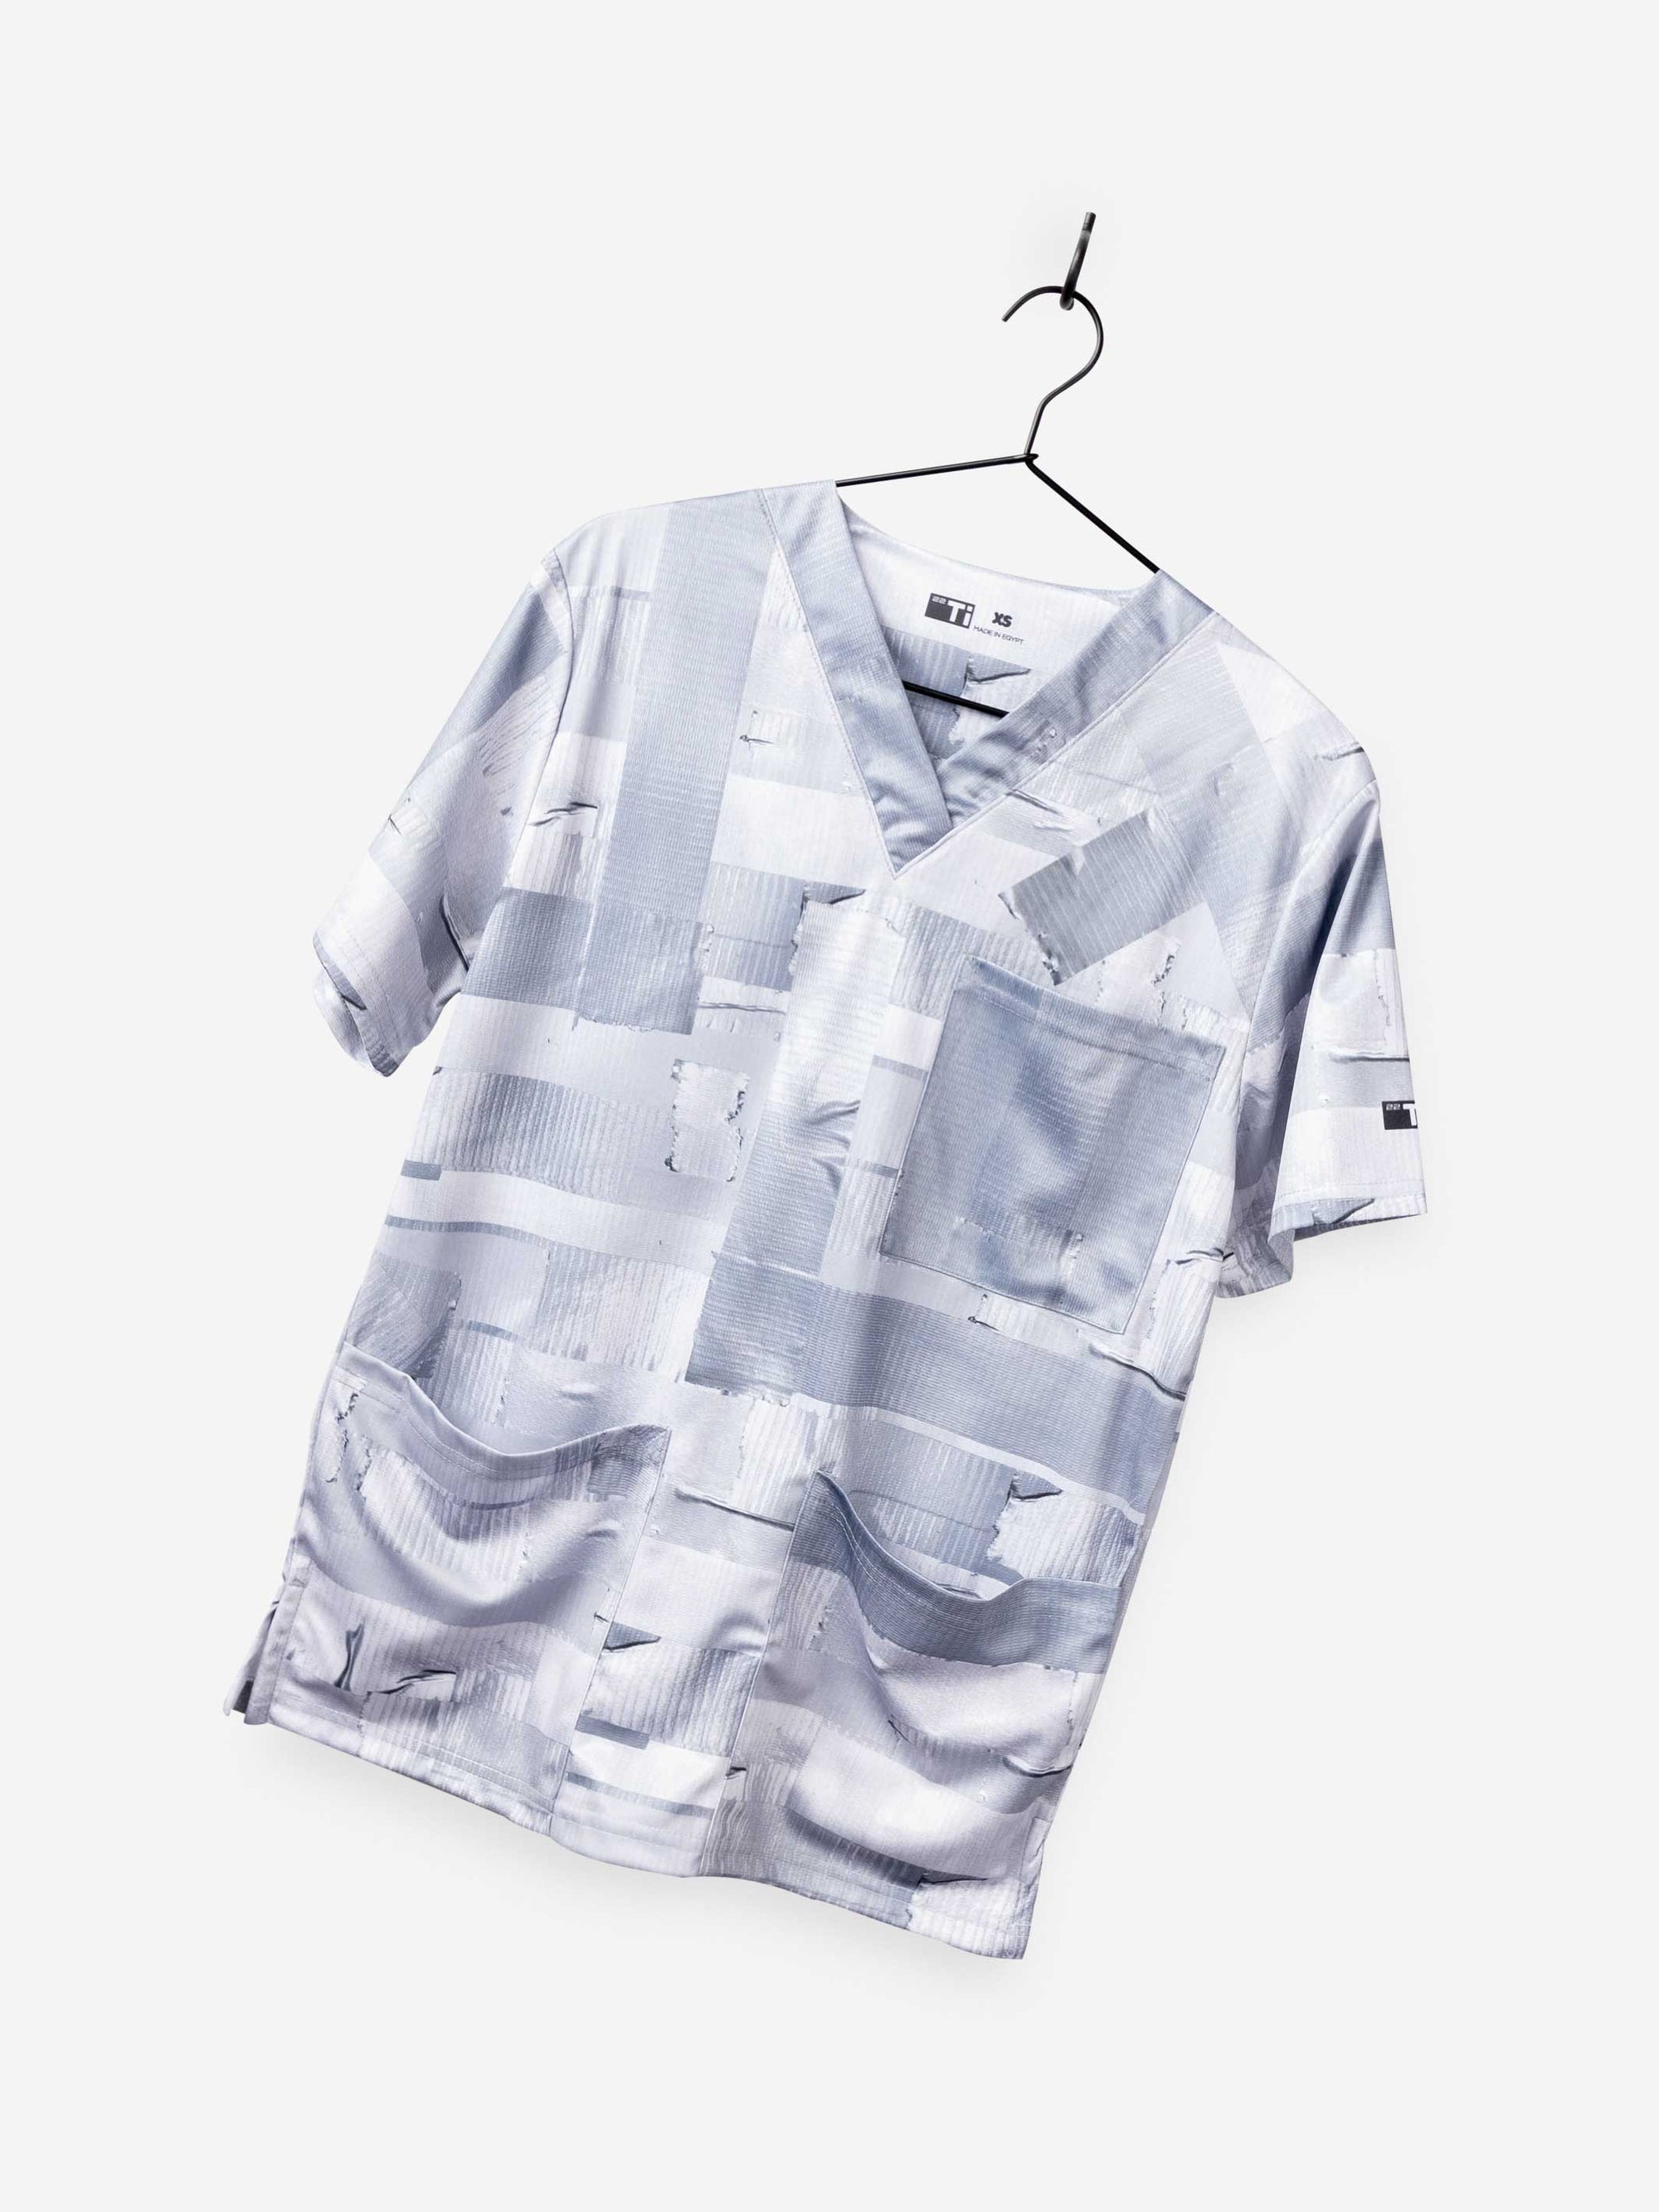 Funny Duct Tape Print Scrub Top For Men with 3 pockets stretch